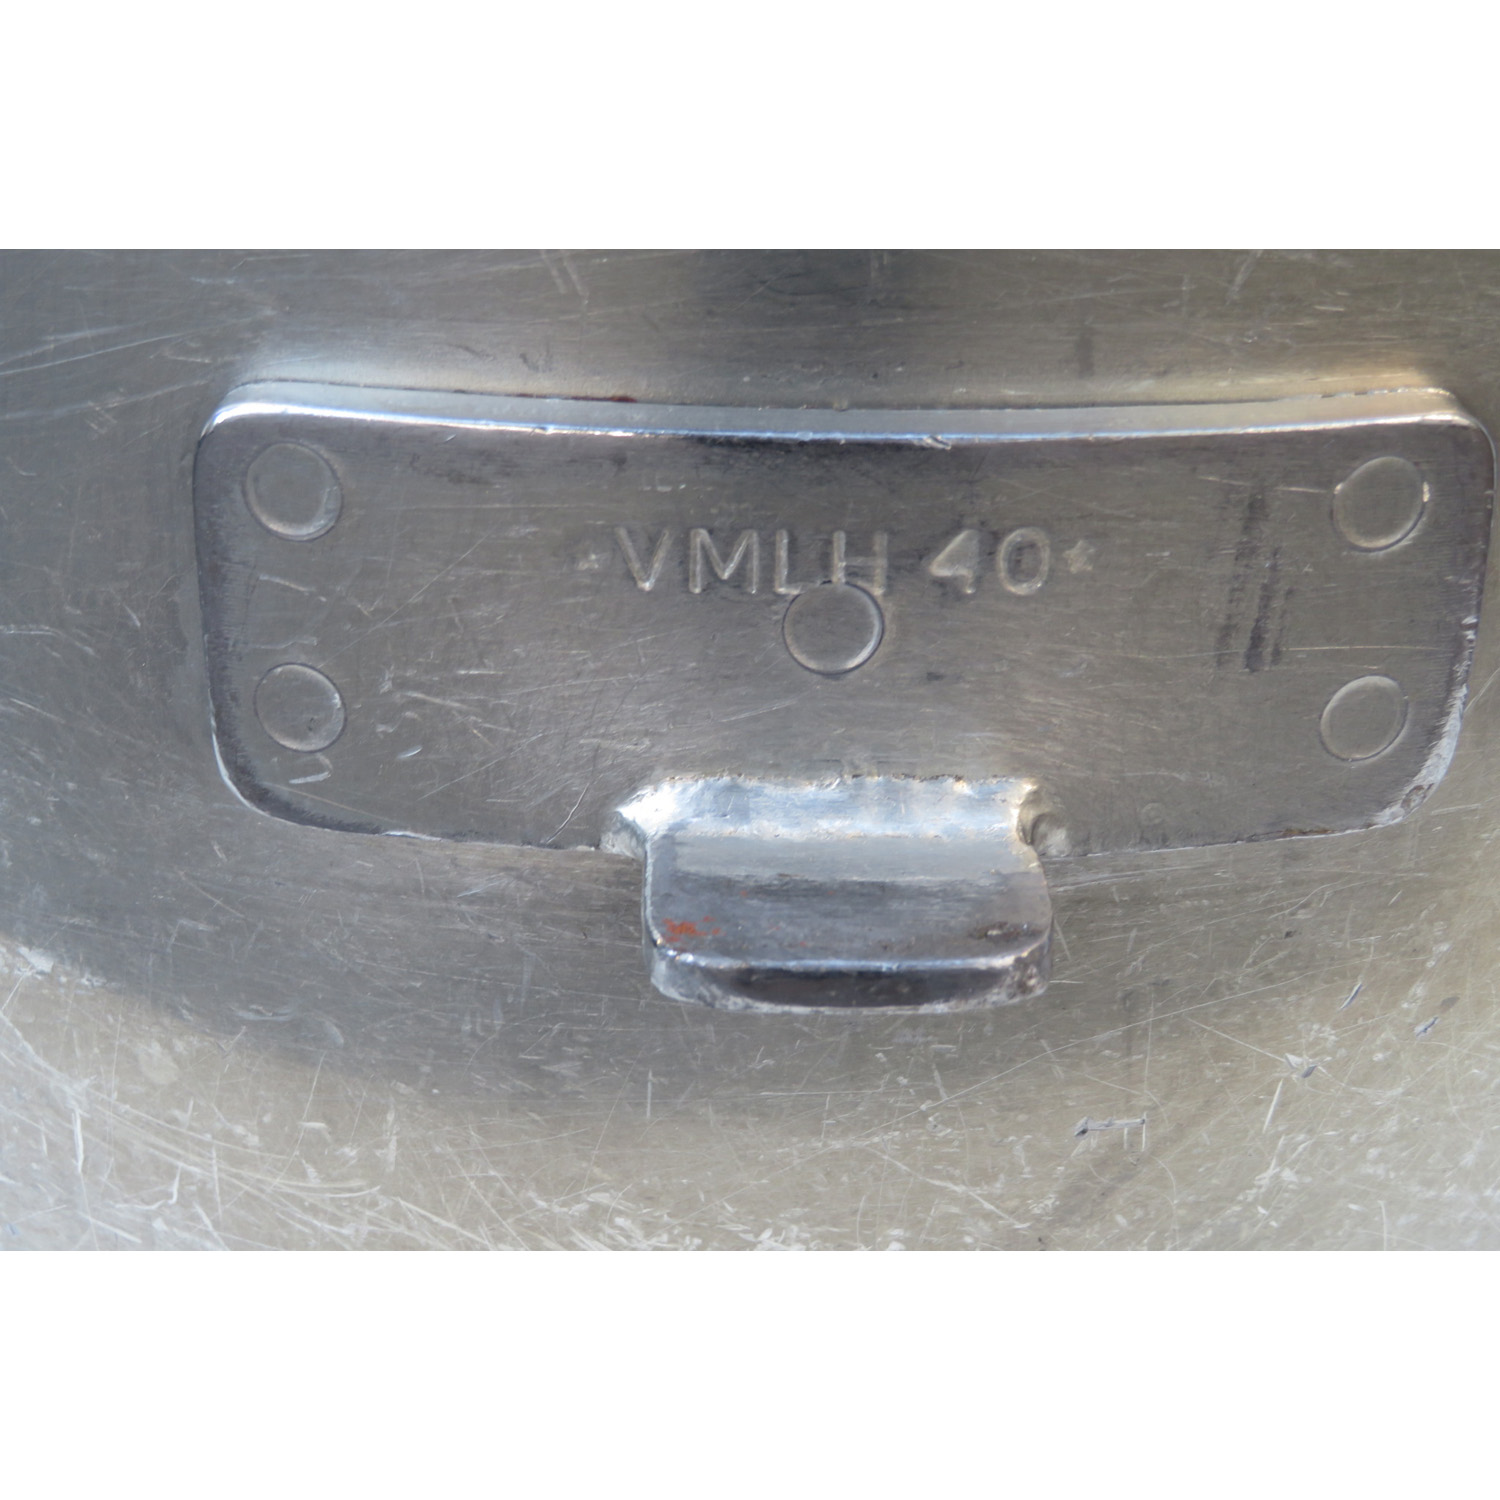 Hobart 00-275686 VMLHP40 40-Quart Bowl for 80 to 40 Bowl Adapter, Used Excellent Condition image 3